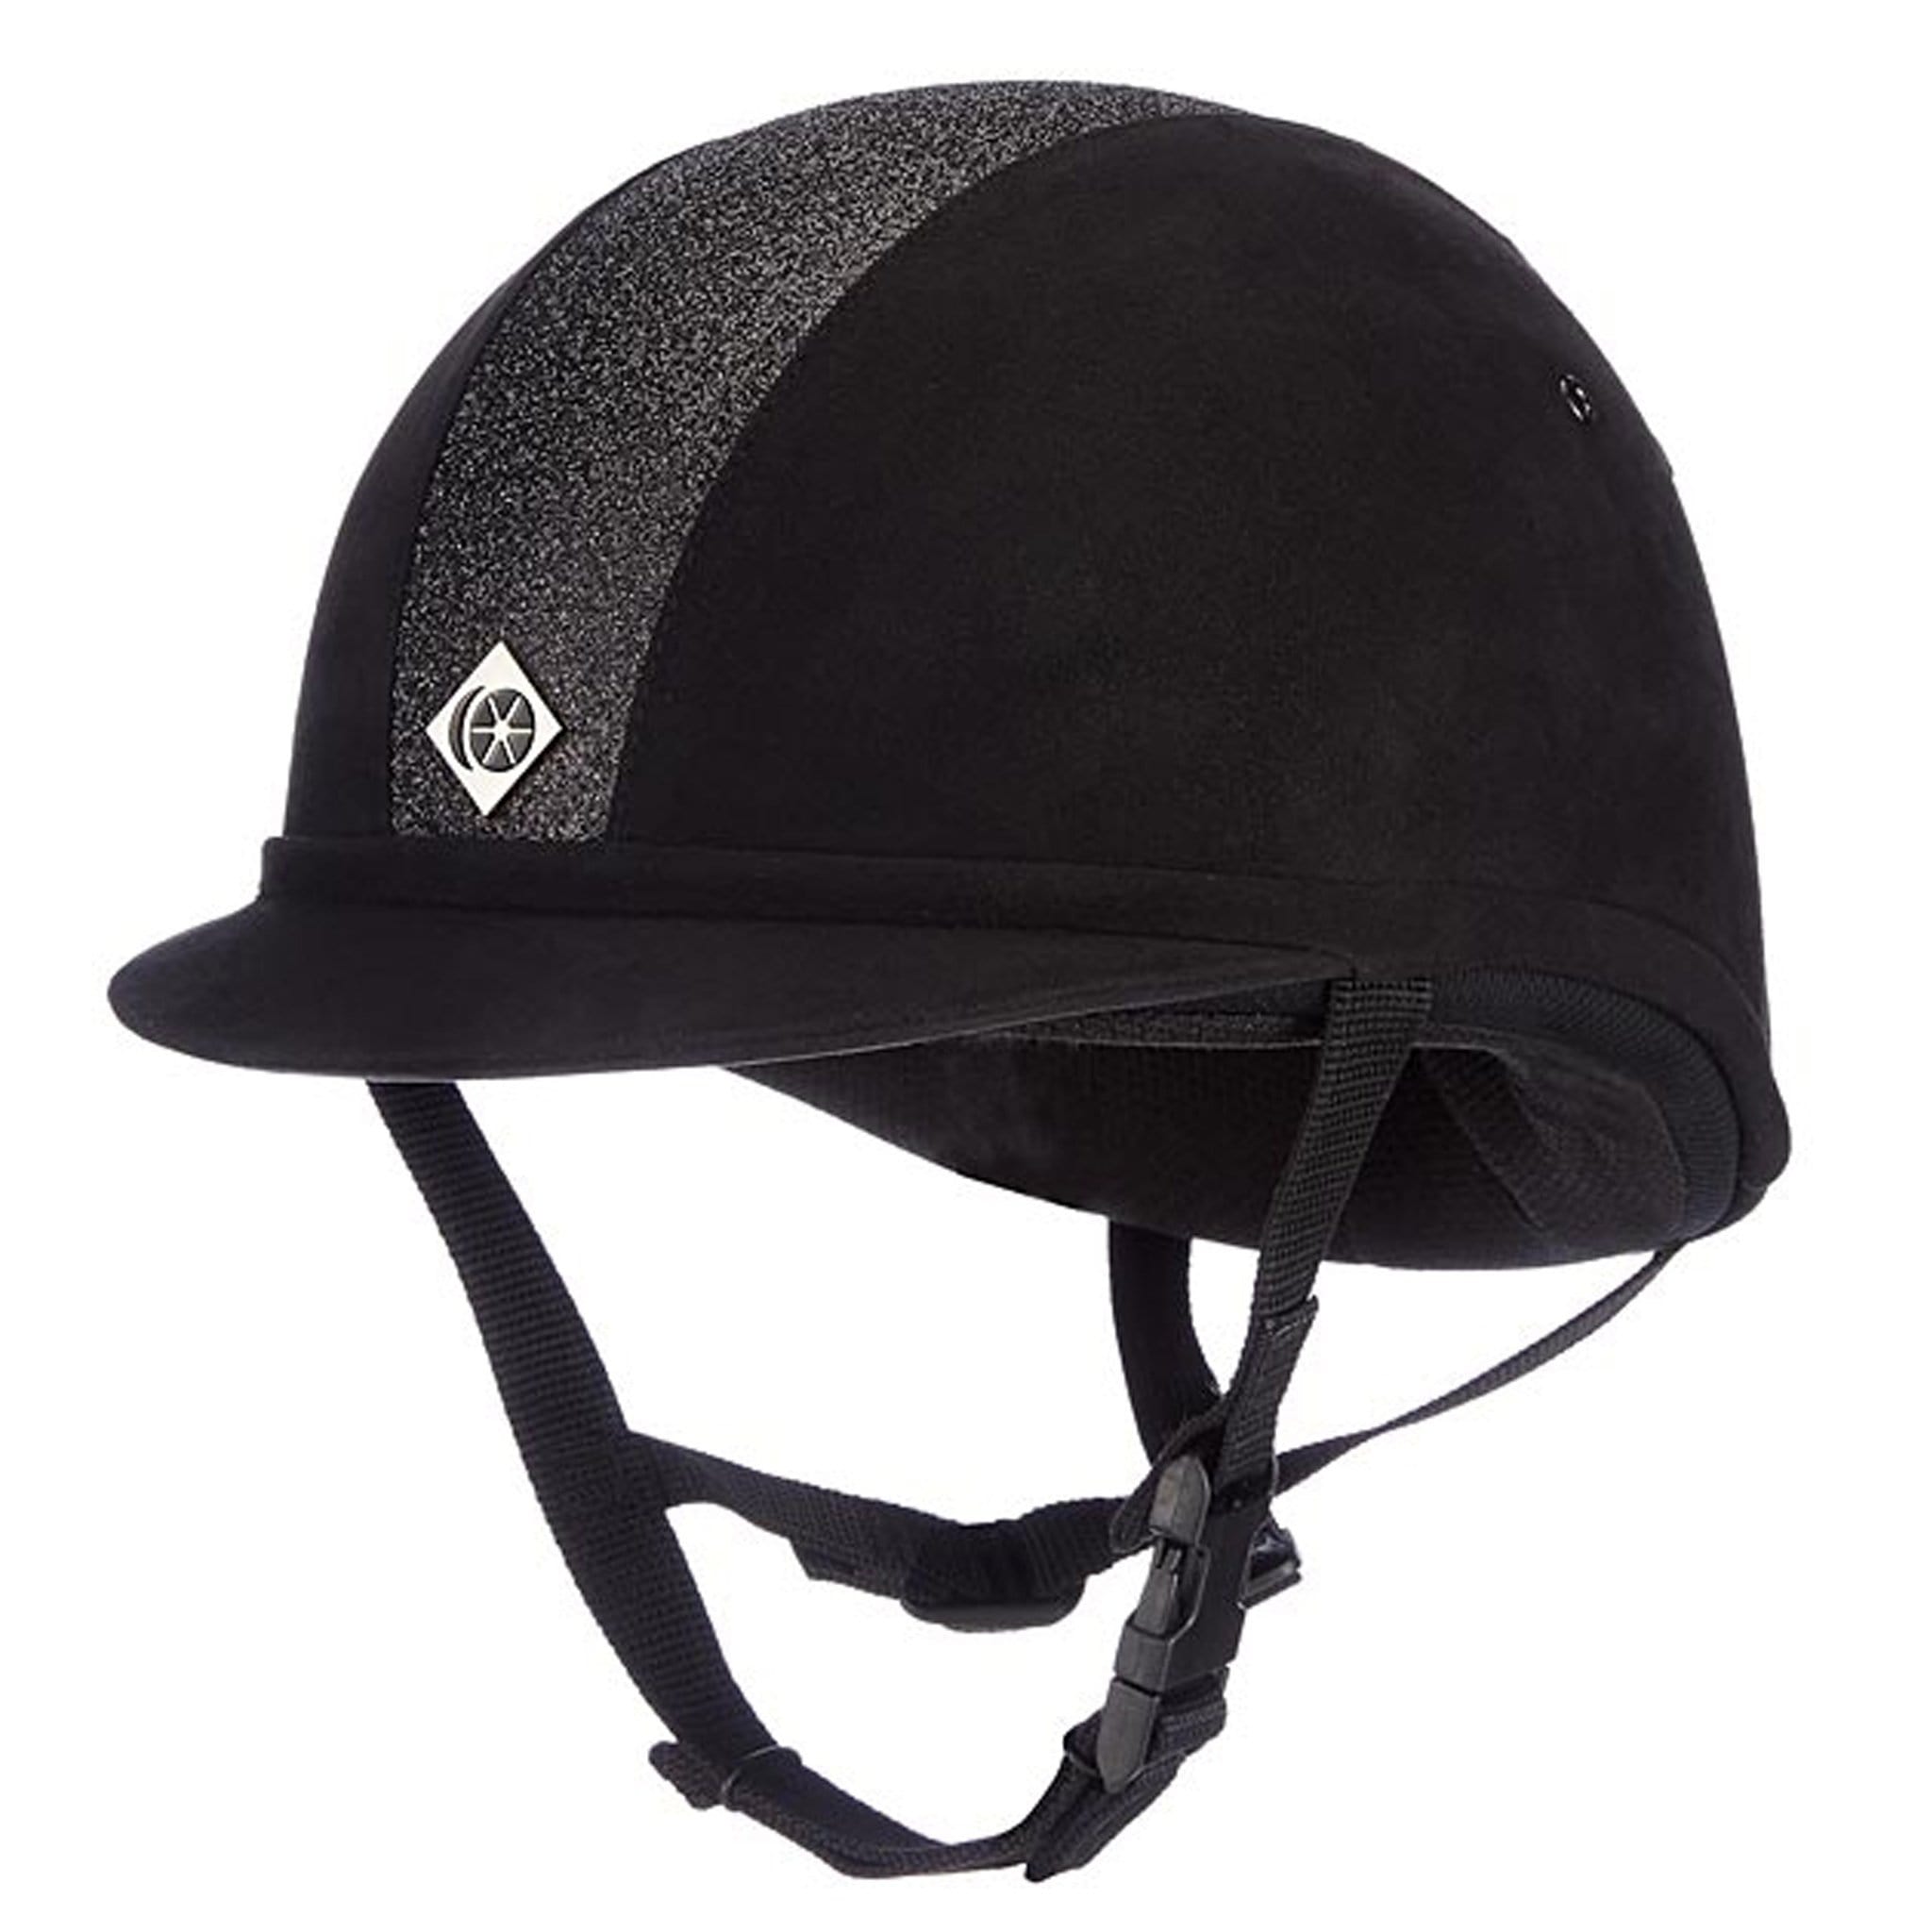 Charles Owen Sparkly YR8 Riding Hat Black And Black Sparkle CHO2495.